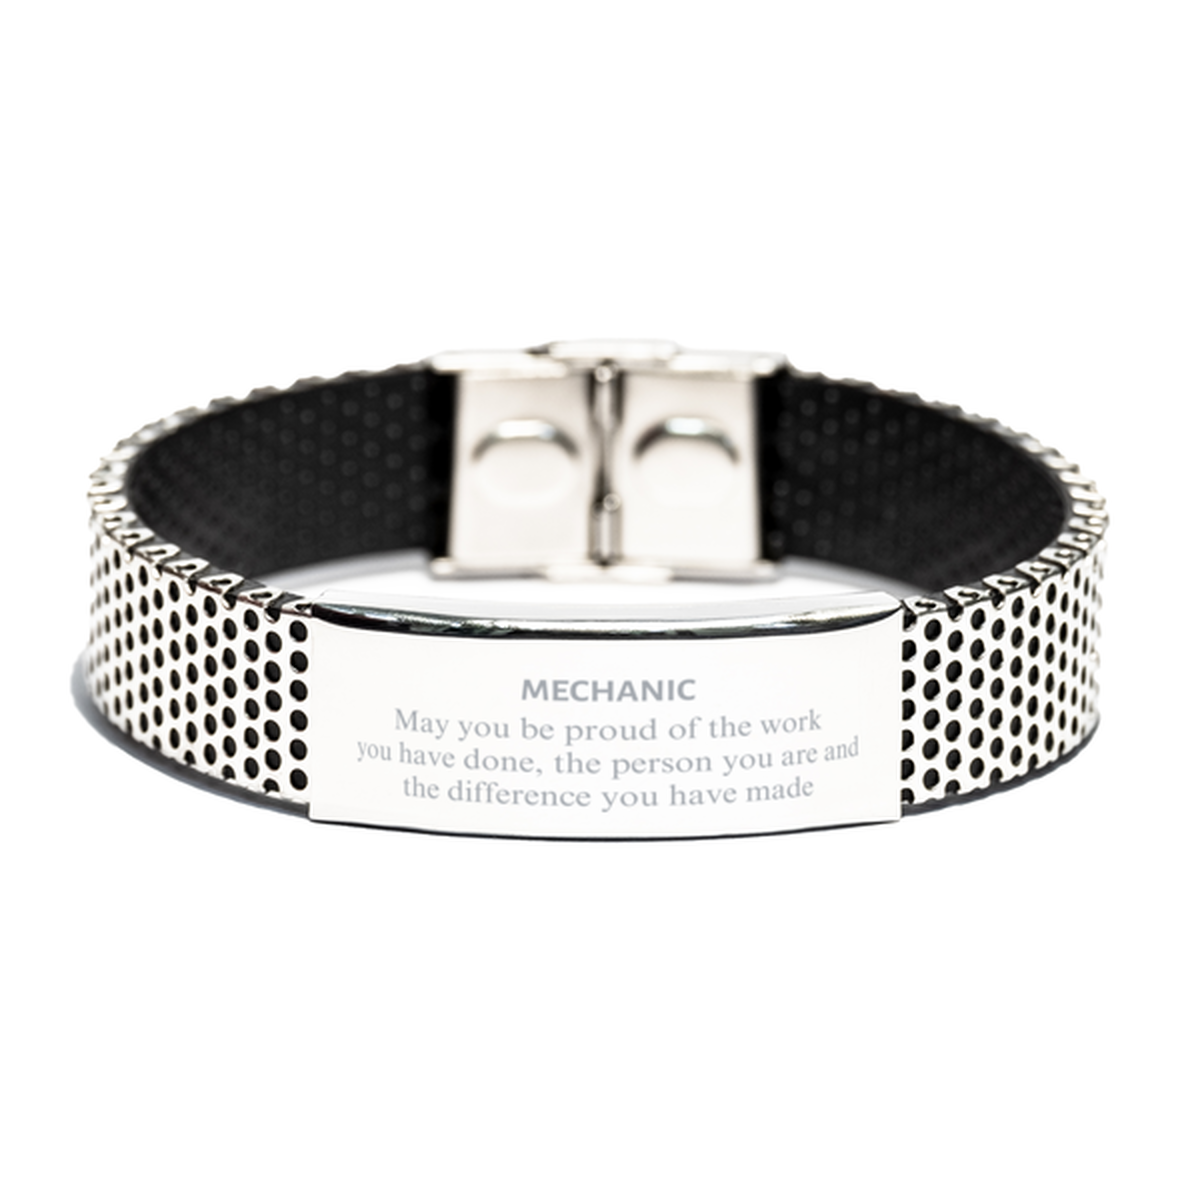 Mechanic May you be proud of the work you have done, Retirement Mechanic Stainless Steel Bracelet for Colleague Appreciation Gifts Amazing for Mechanic